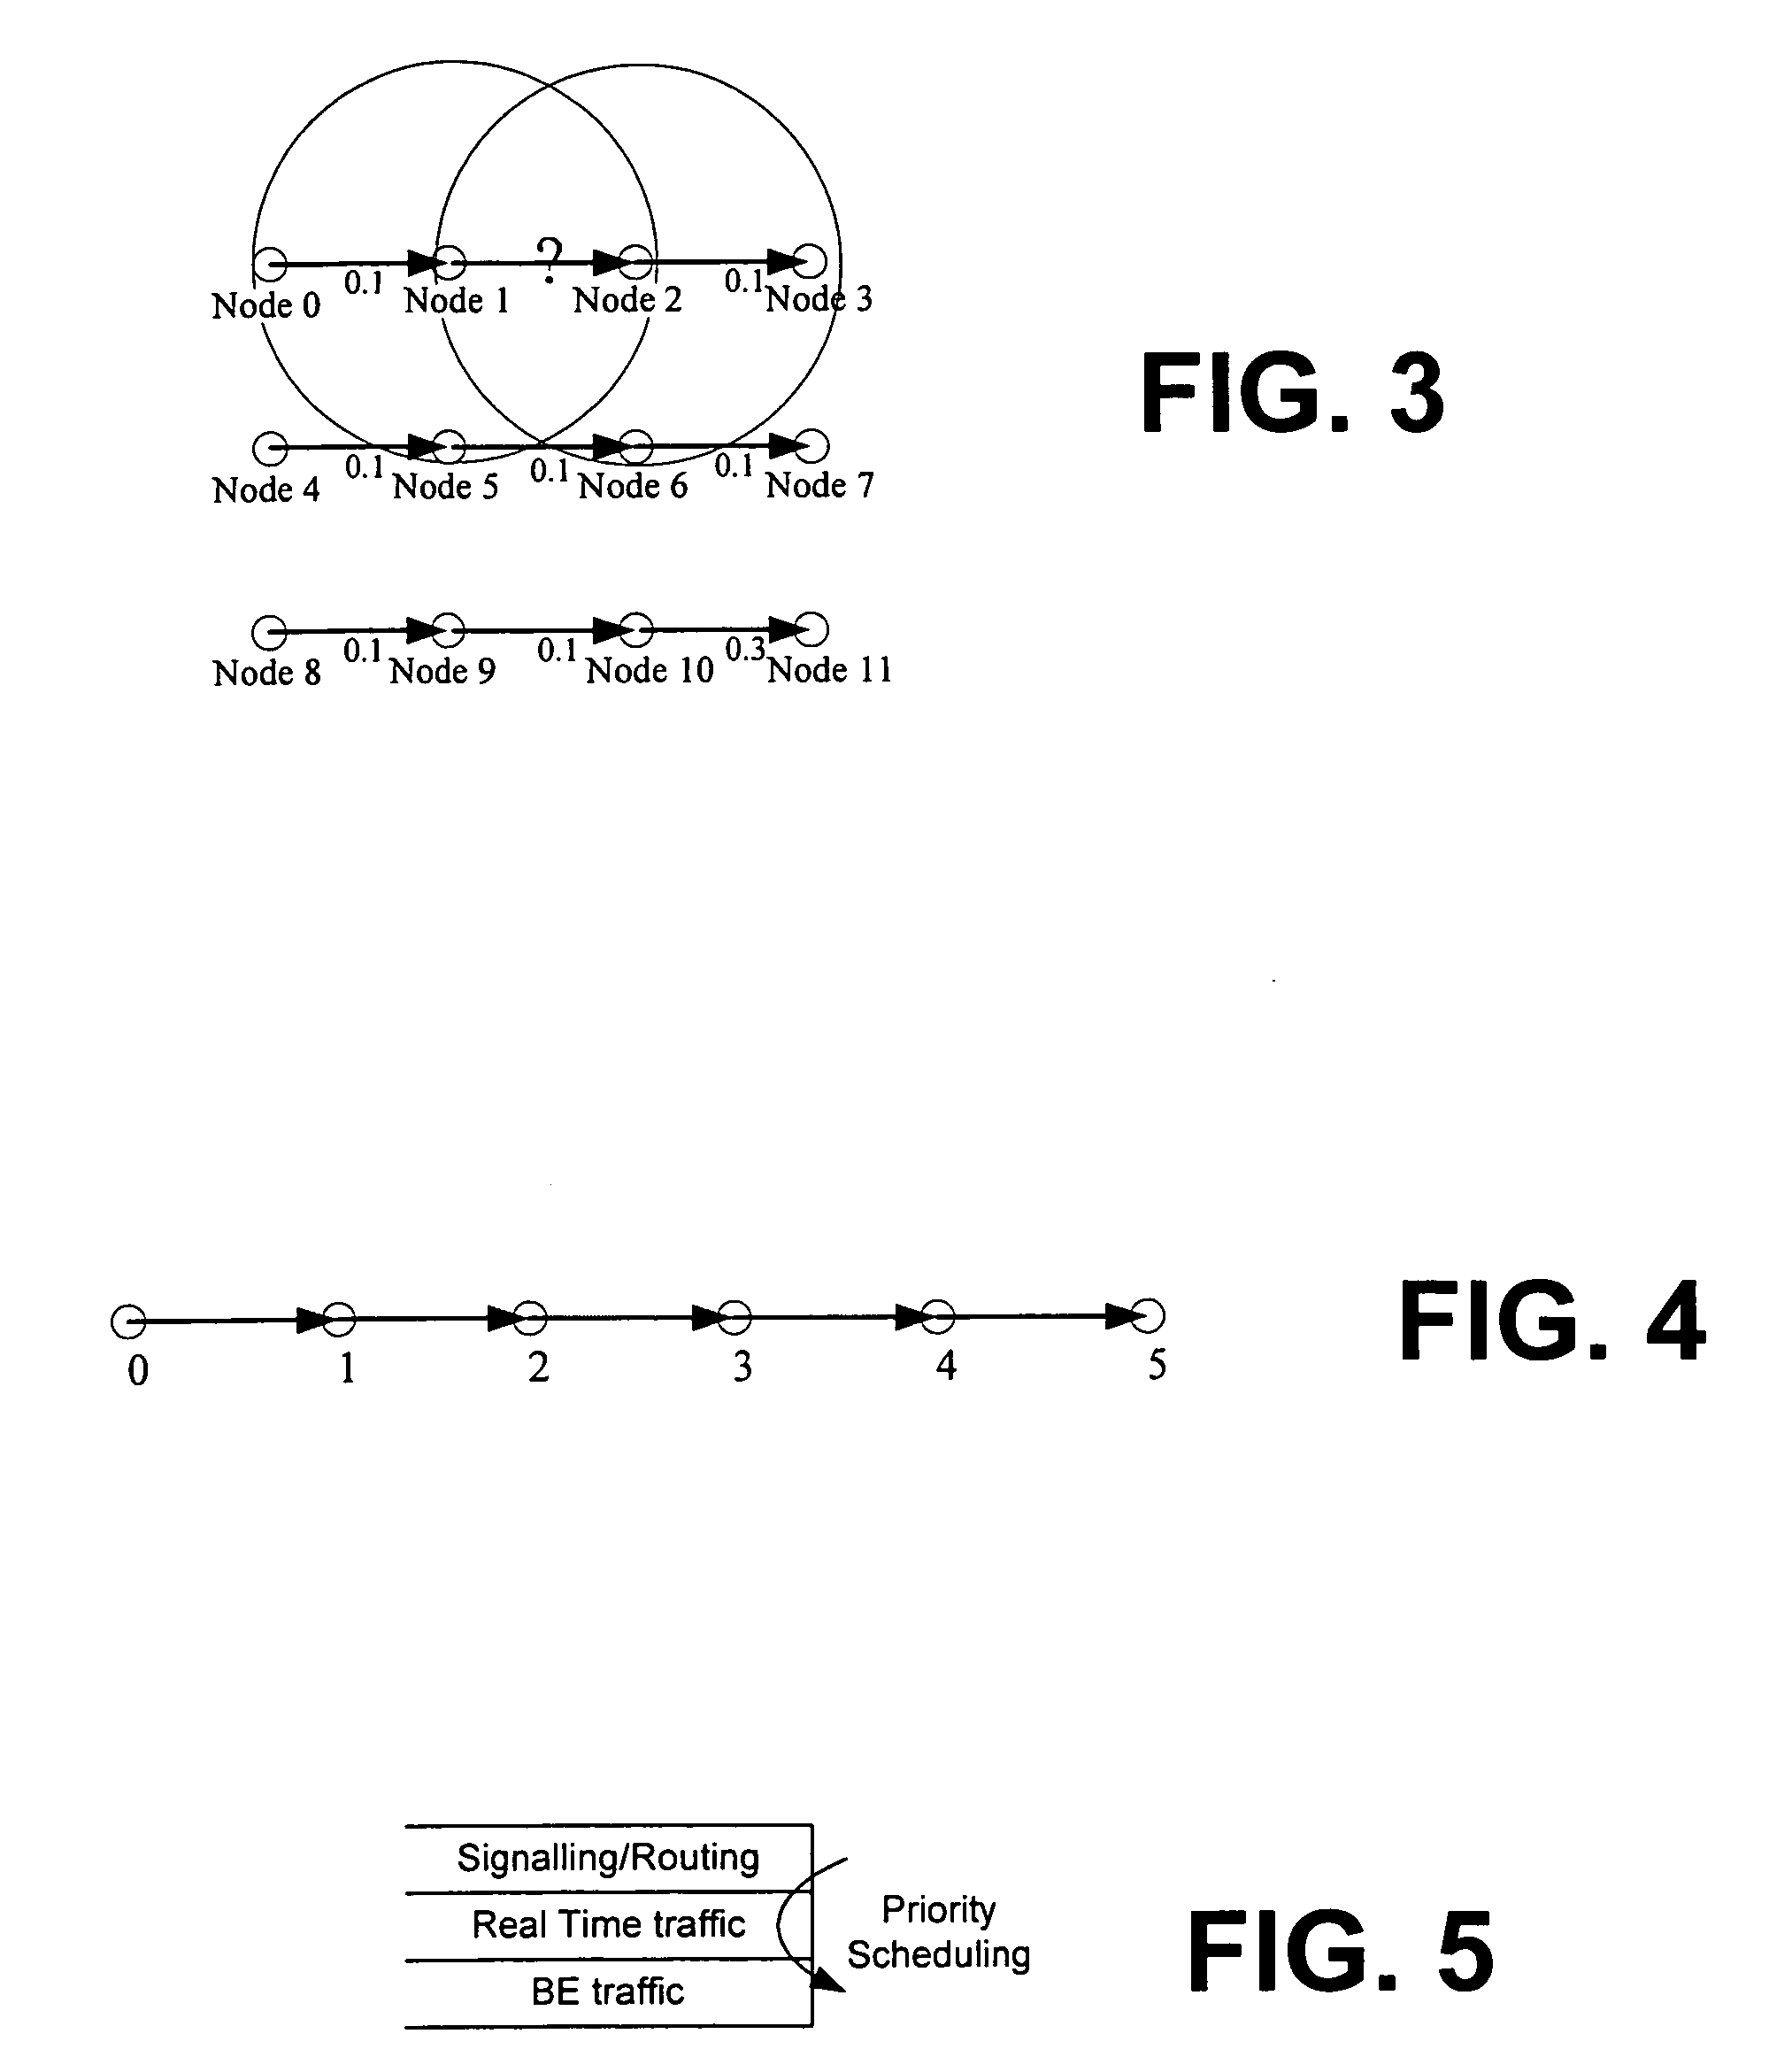 Systems and methods for coordinating wireless traffic for heterogeneous wireless devices